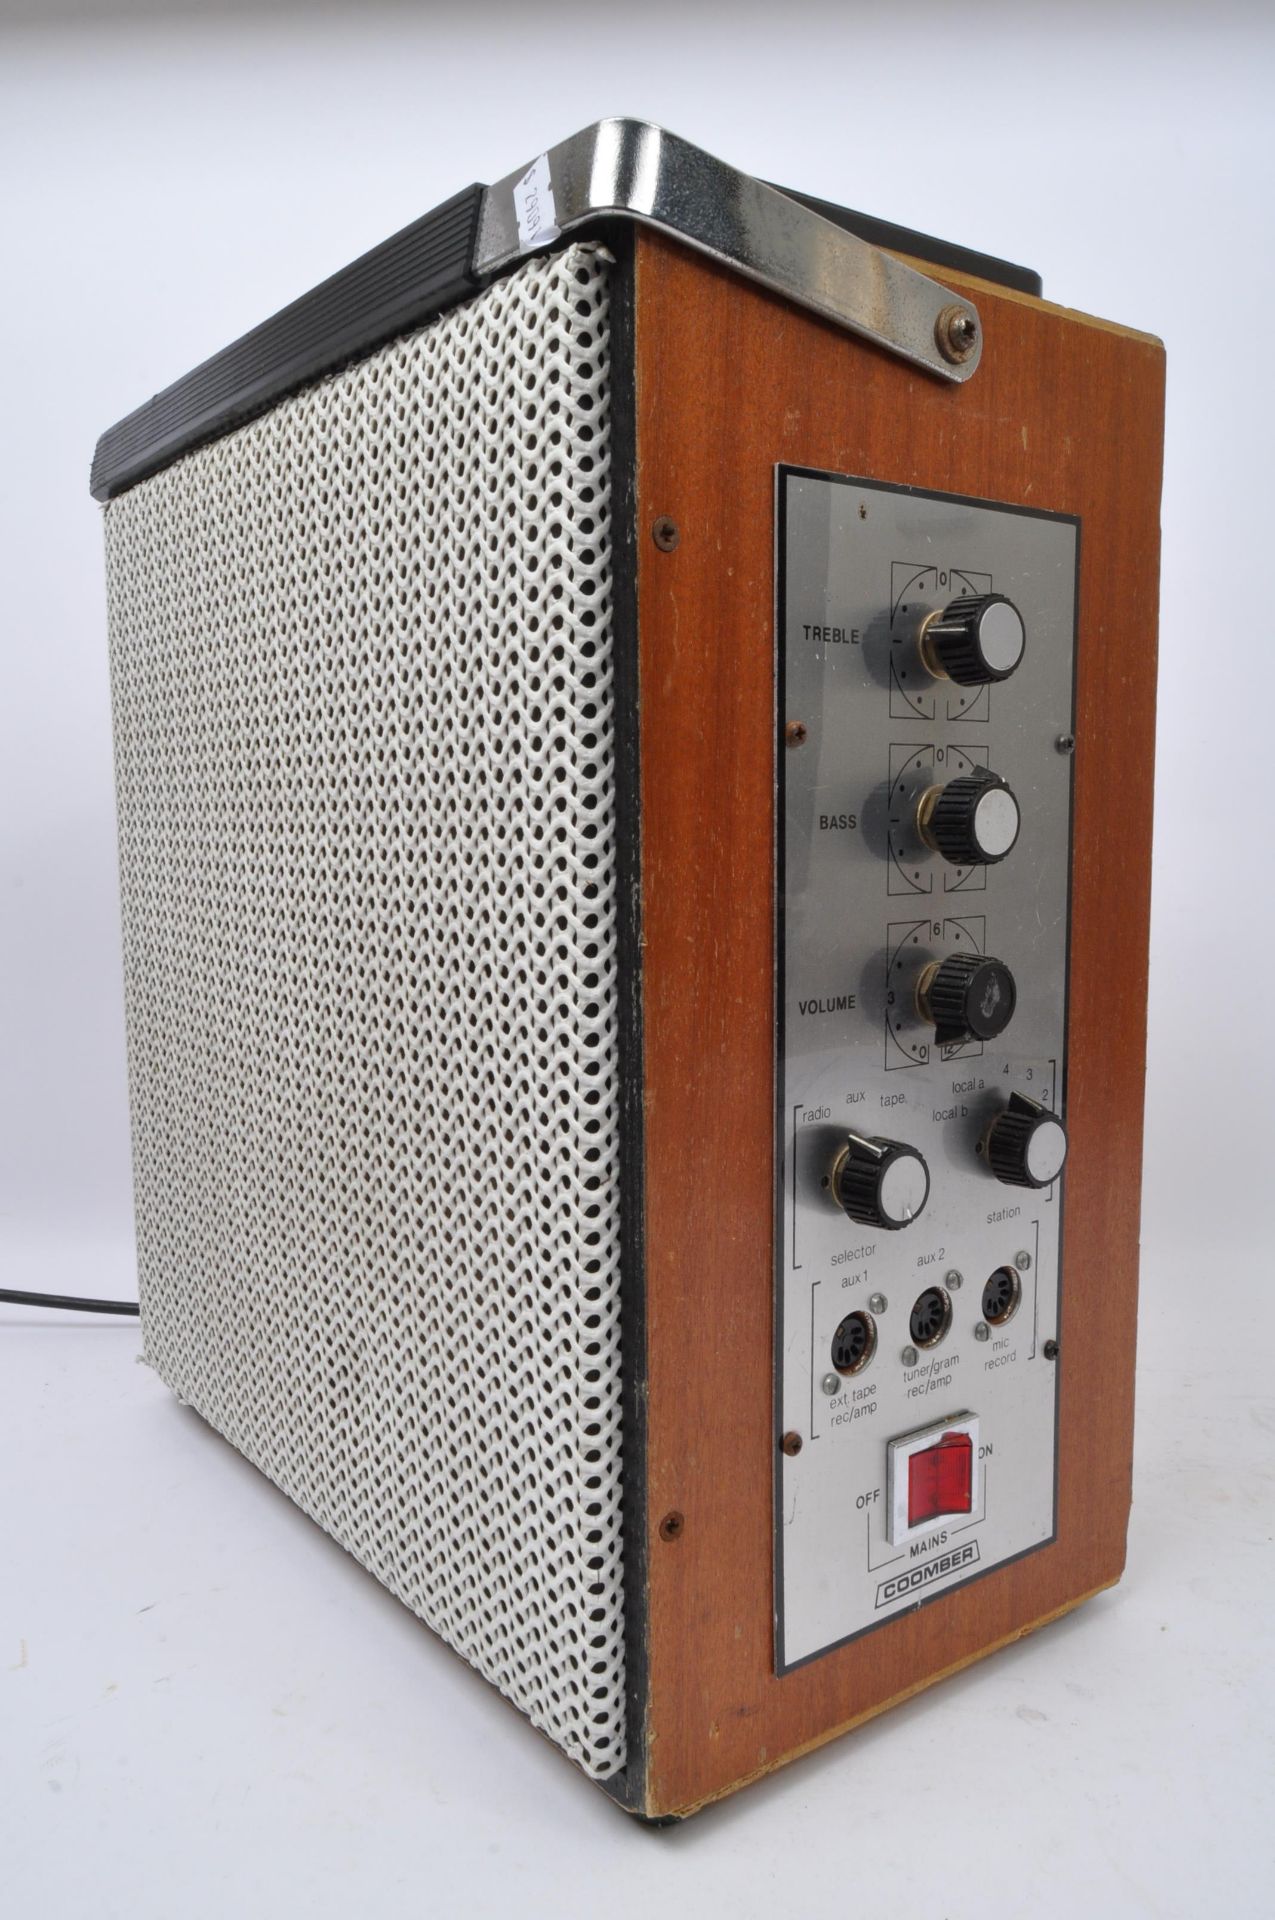 VINTAGE TANBERG 'SERIES 15' TAPER RECORDER T/W ANOTHER - Image 5 of 5